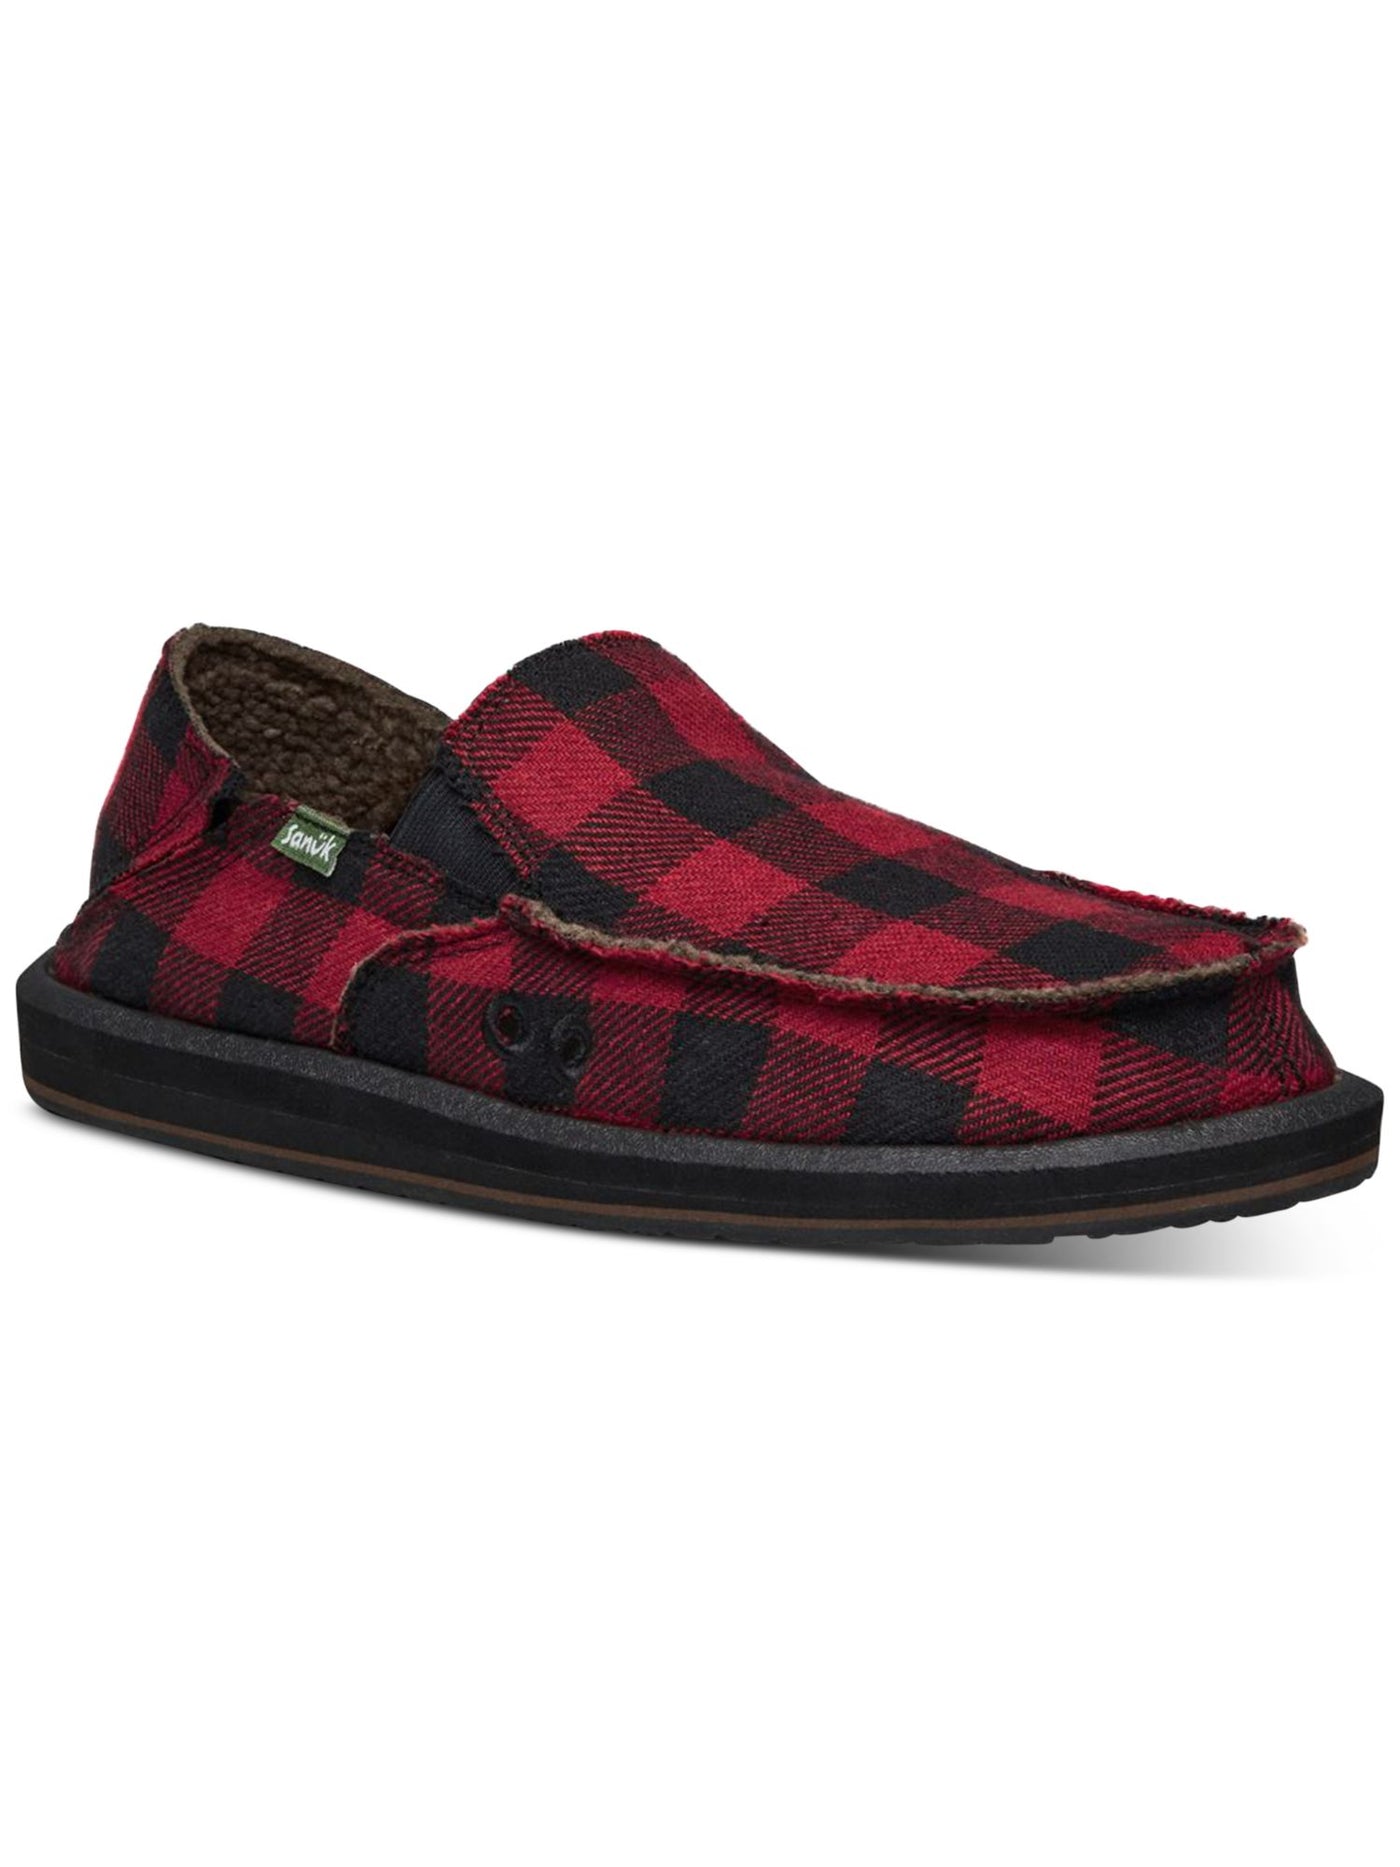 SANUK Mens Red Plaid Buffalo Padded Goring Comfort Vagabond Chill Round Toe Slip On Loafers Shoes 8